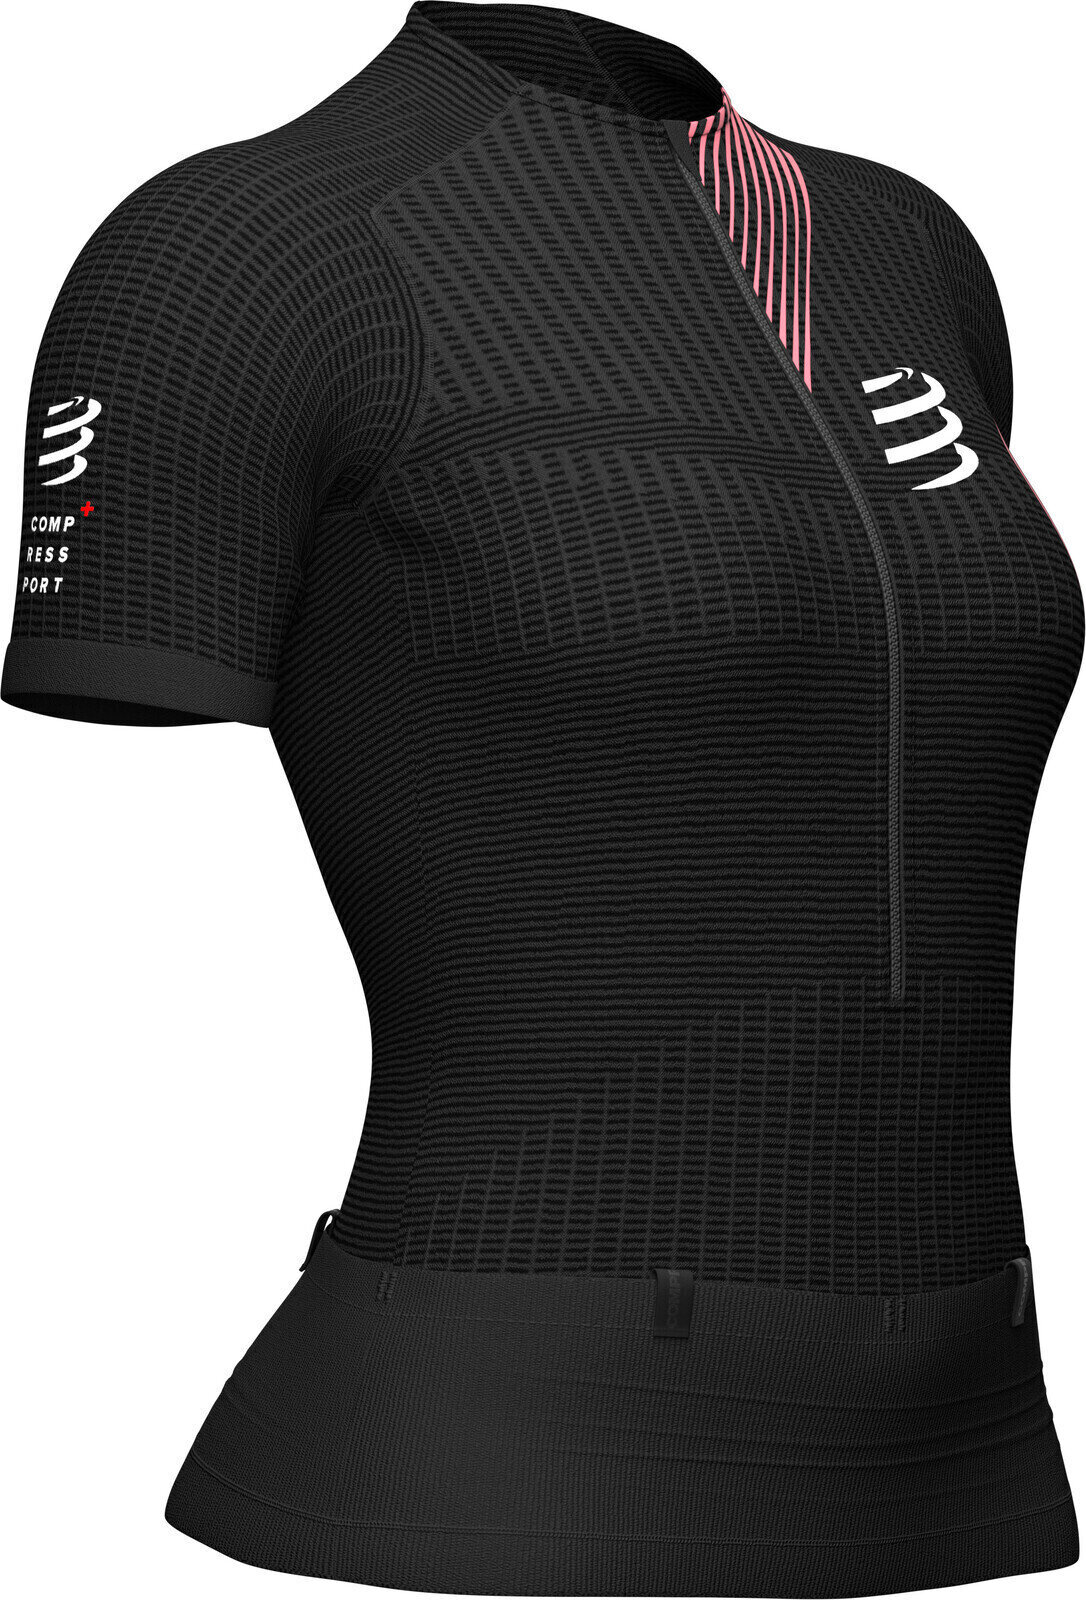 Running t-shirt with short sleeves
 Compressport Trail Postural Top Black M Running t-shirt with short sleeves